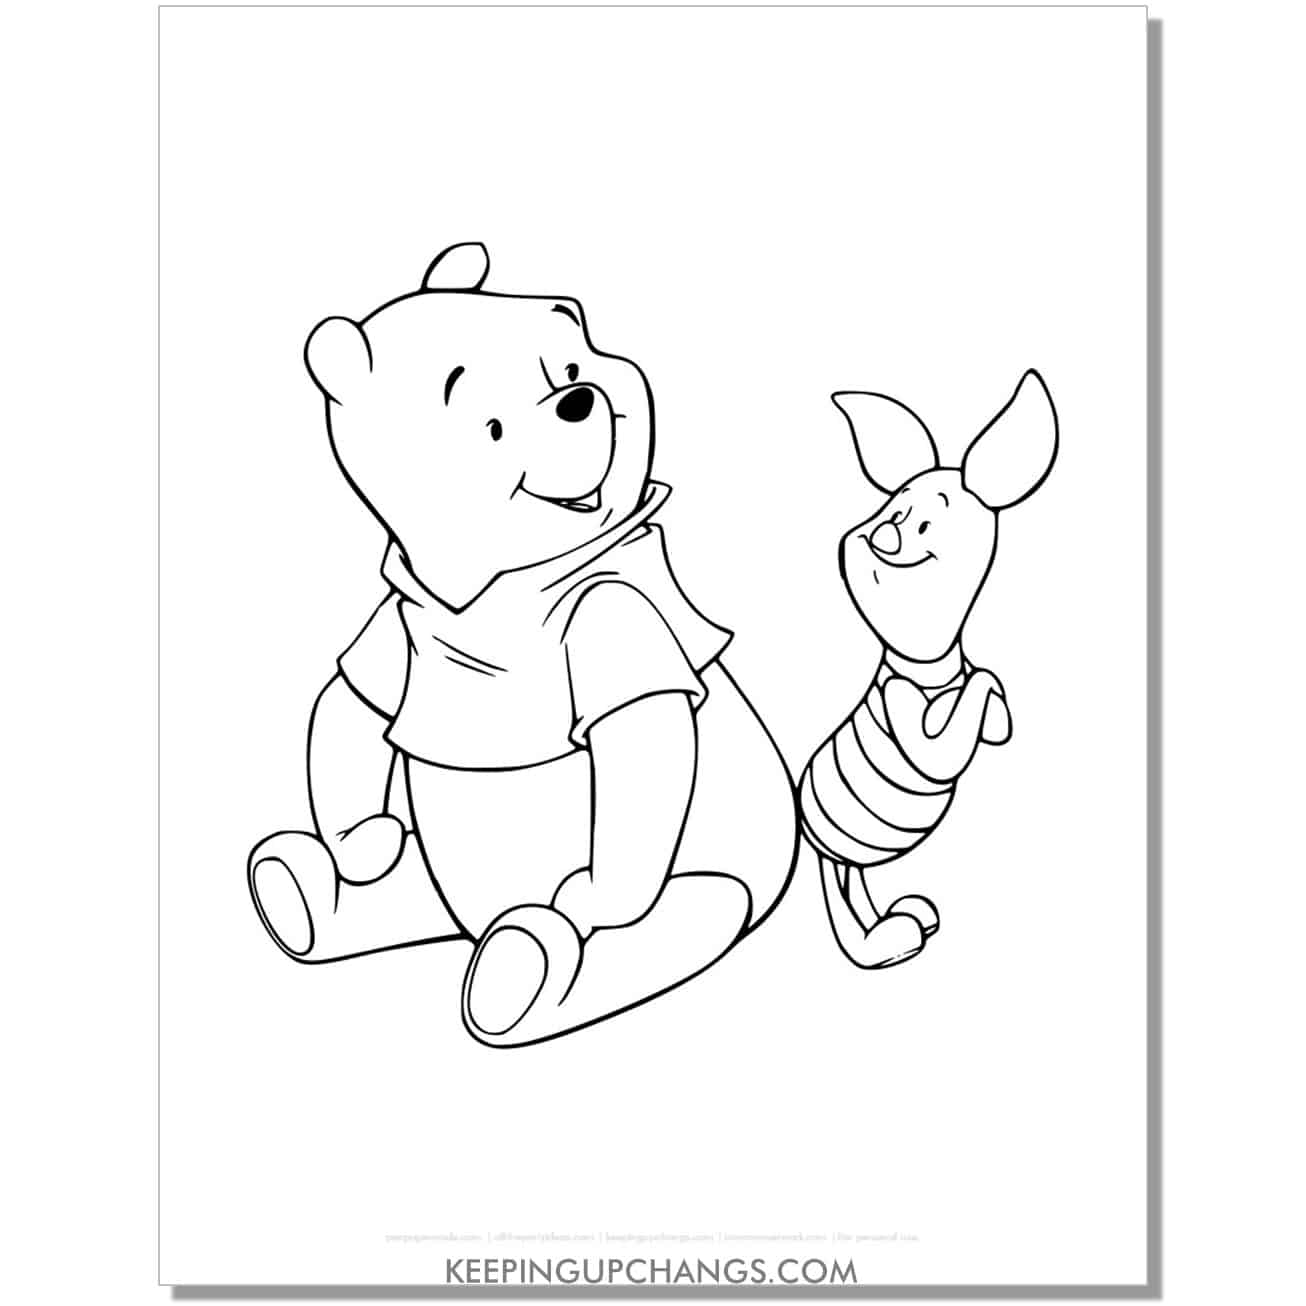 winnie the pooh looks at piglet coloring page, sheet.